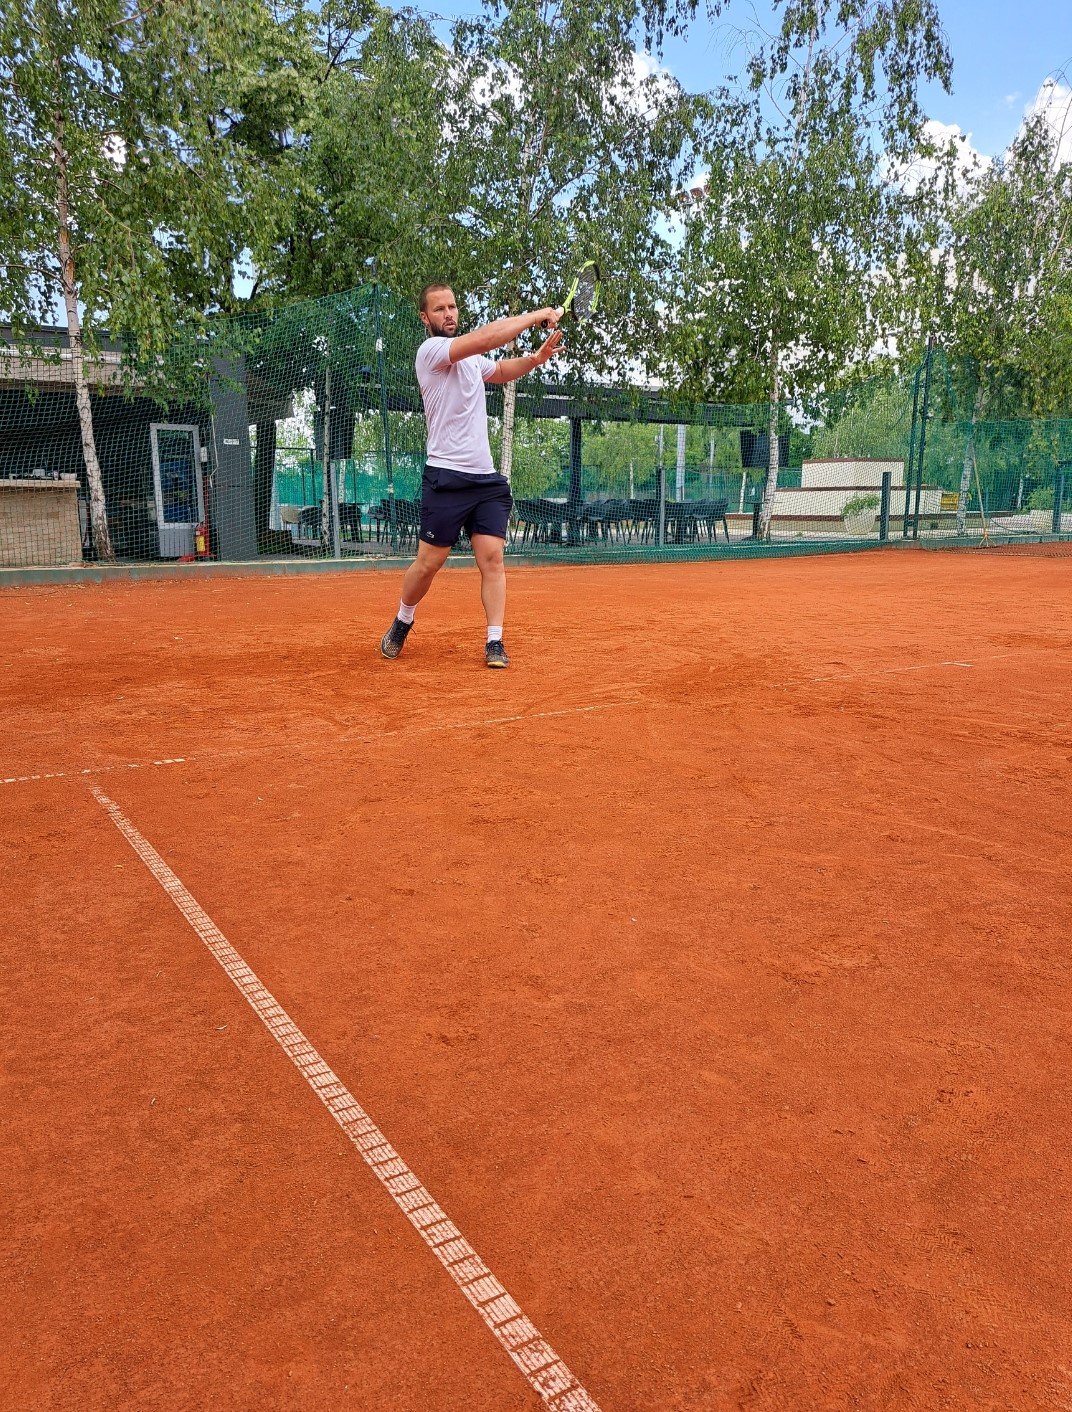 How to Hit a Forehand in Tennis - Our Top Tips Revealed